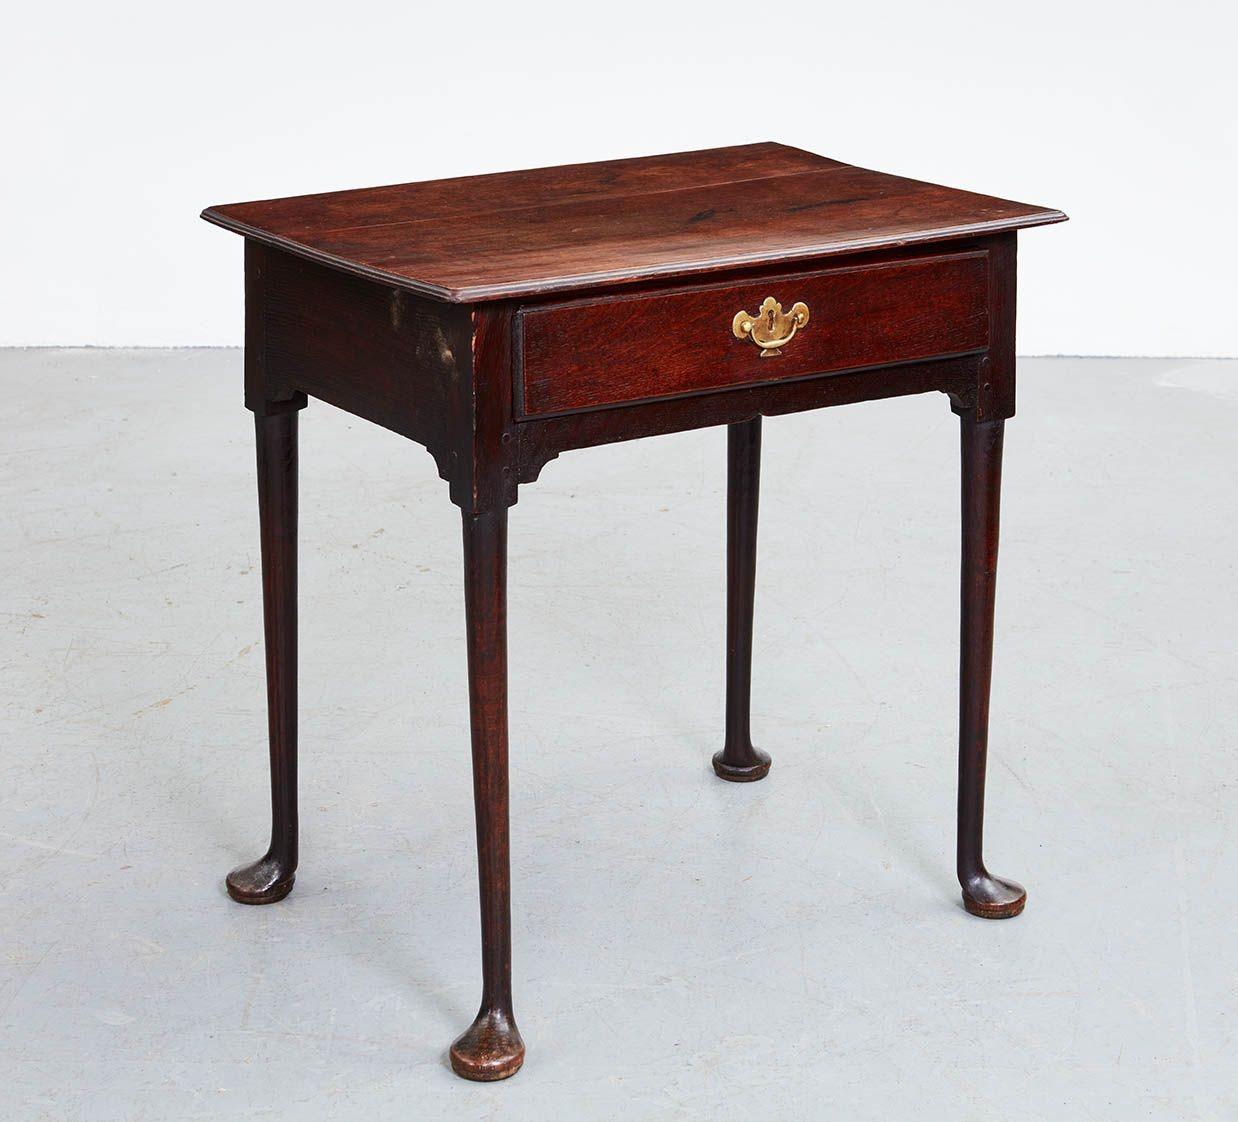 An 18th century English oak side table with two plank top having molded edge and rounded corners over single drawer with bail pull and brass back plate, having front apron with notched center, corner brackets at leg joins, and standing on tall